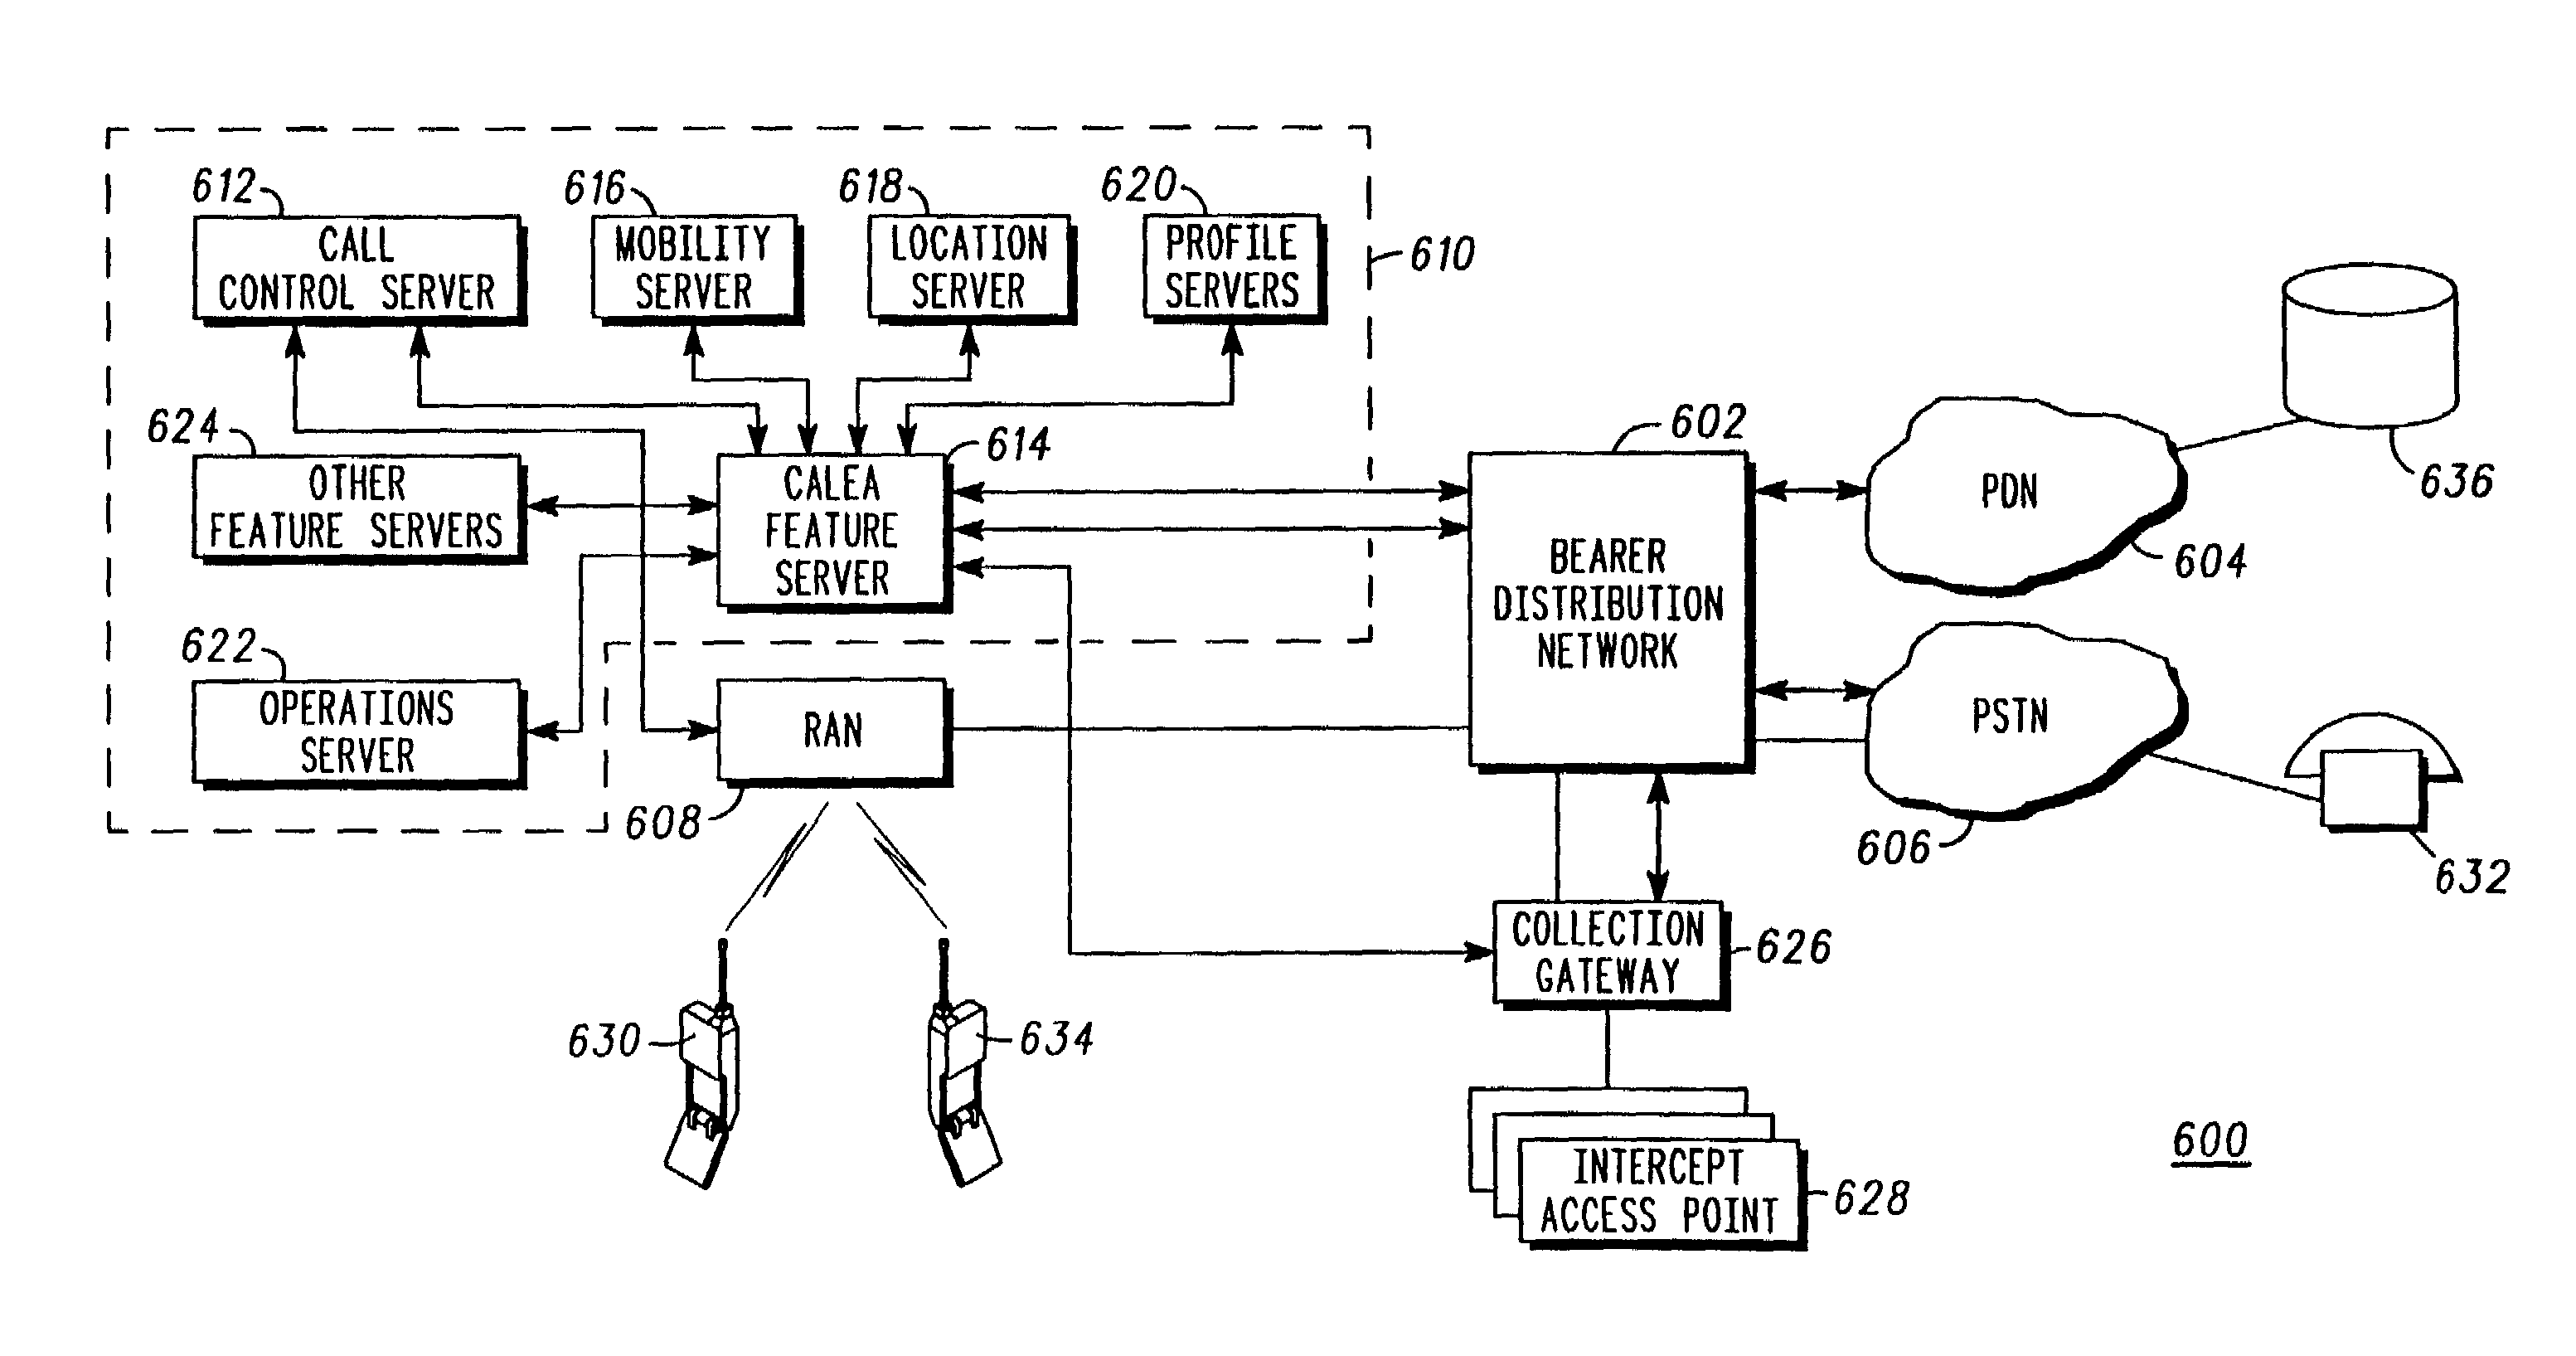 Communication network with a collection gateway and method for providing surveillance services